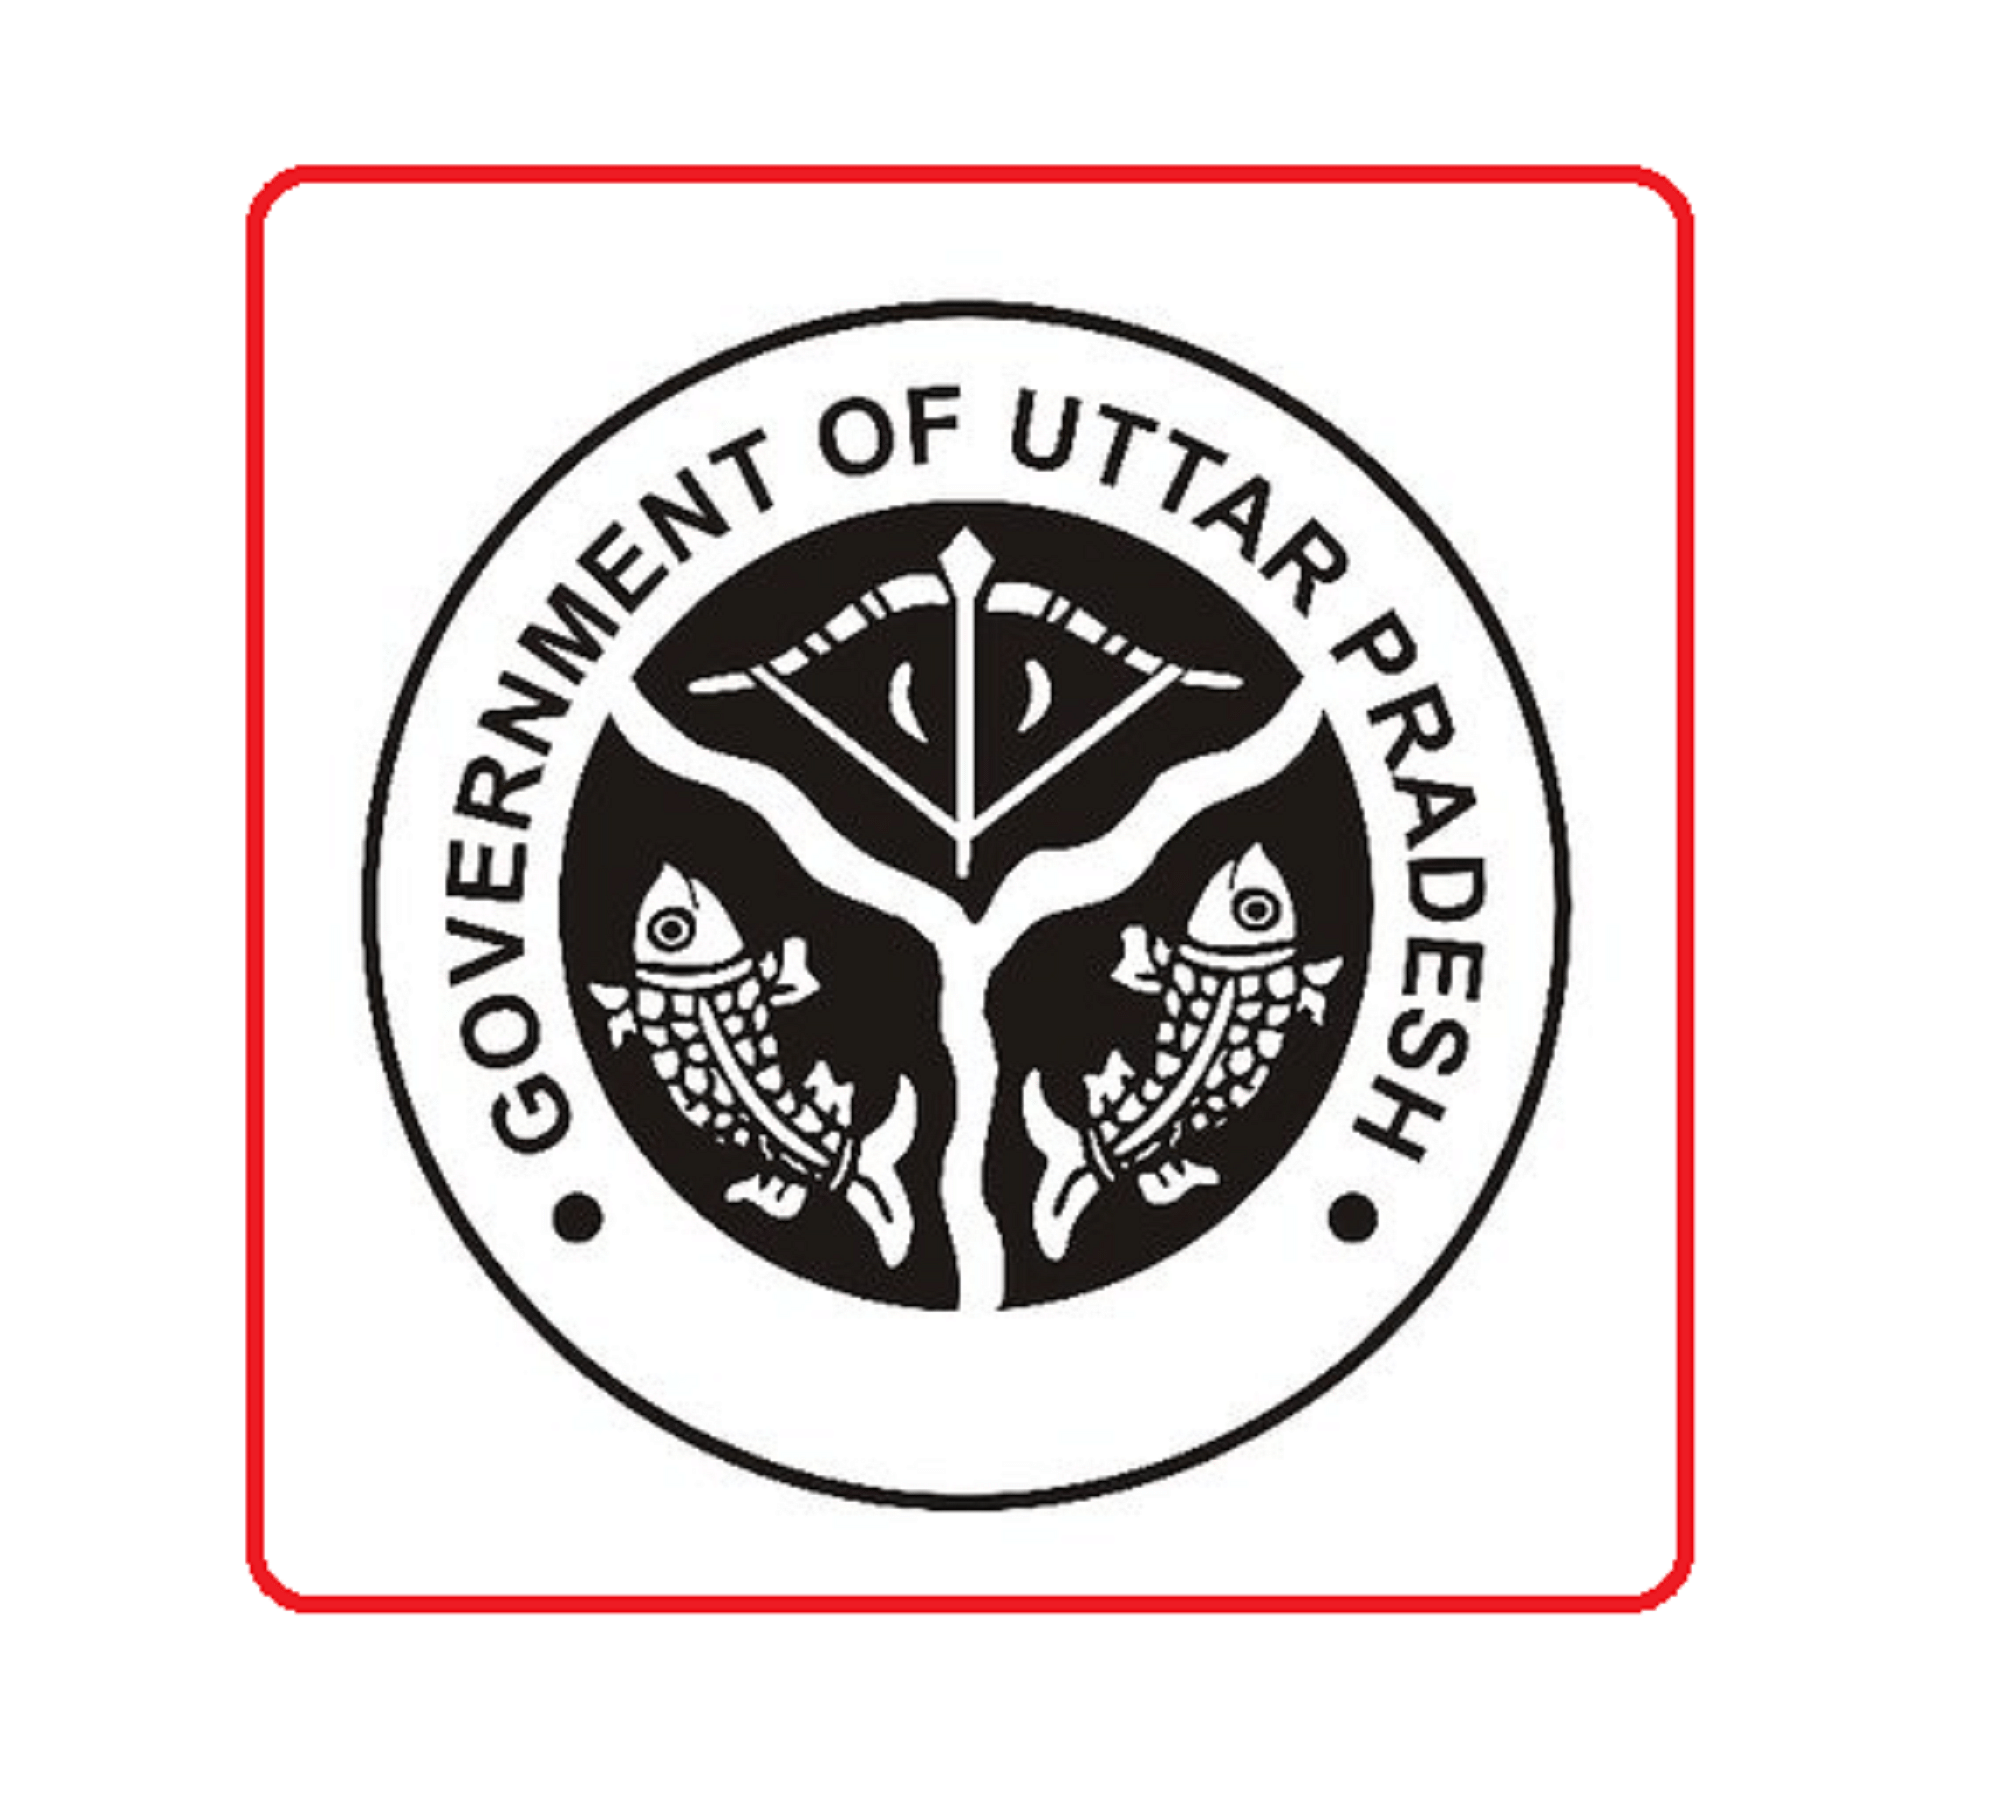 UPTET 2019 Notification to Release Any Time Soon, Check Details Here